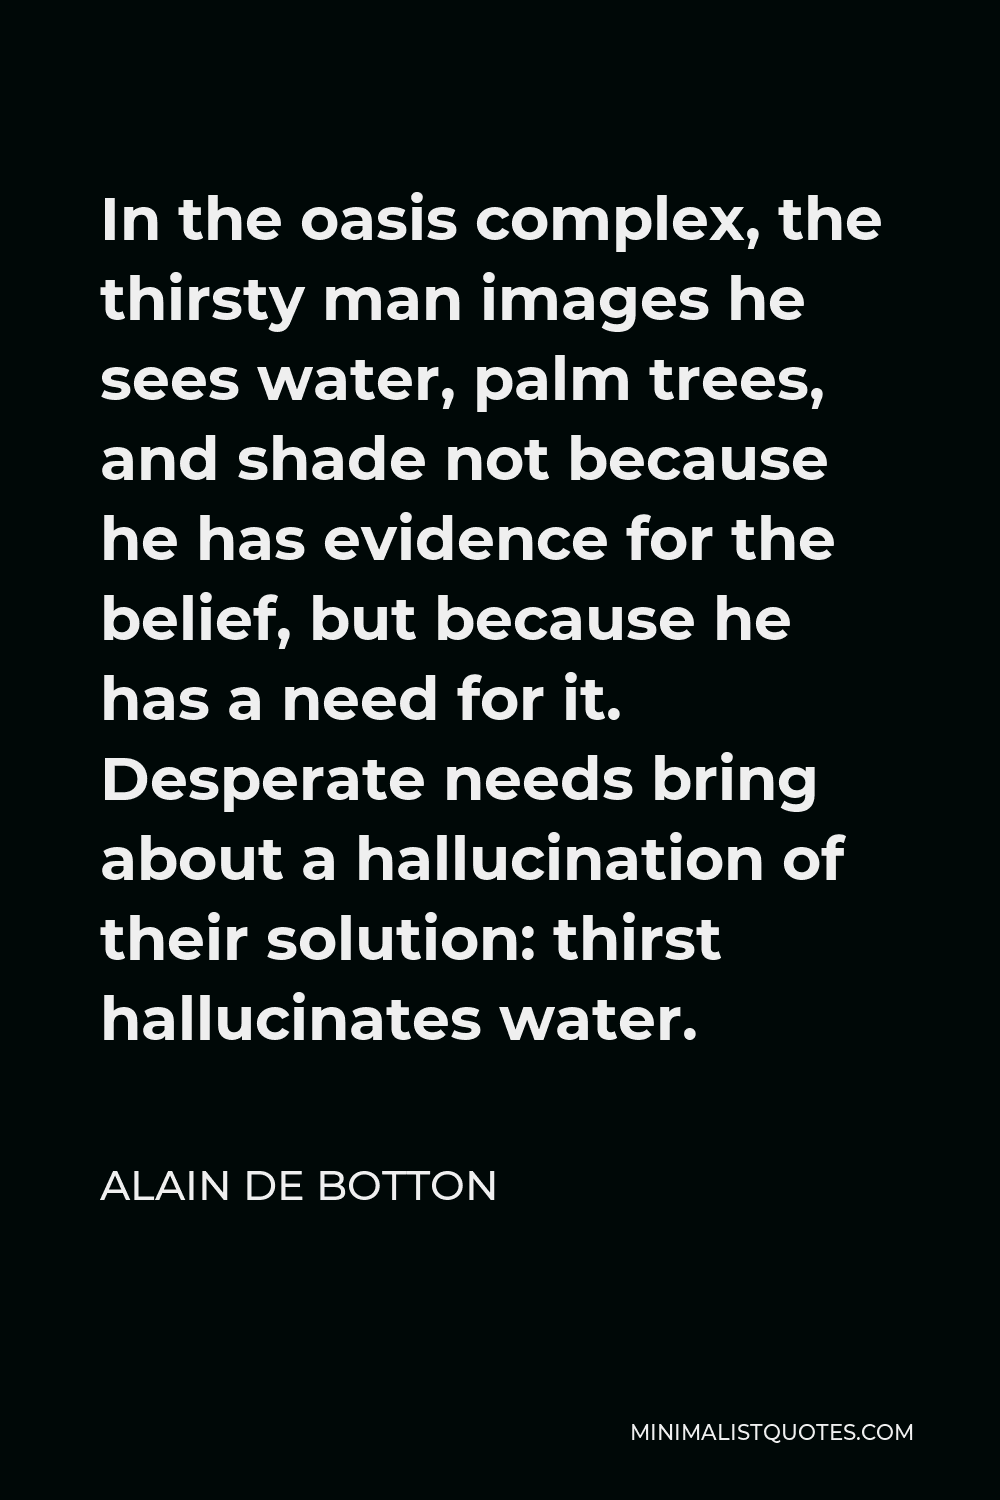 Alain de Botton Quote - In the oasis complex, the thirsty man images he sees water, palm trees, and shade not because he has evidence for the belief, but because he has a need for it. Desperate needs bring about a hallucination of their solution: thirst hallucinates water.